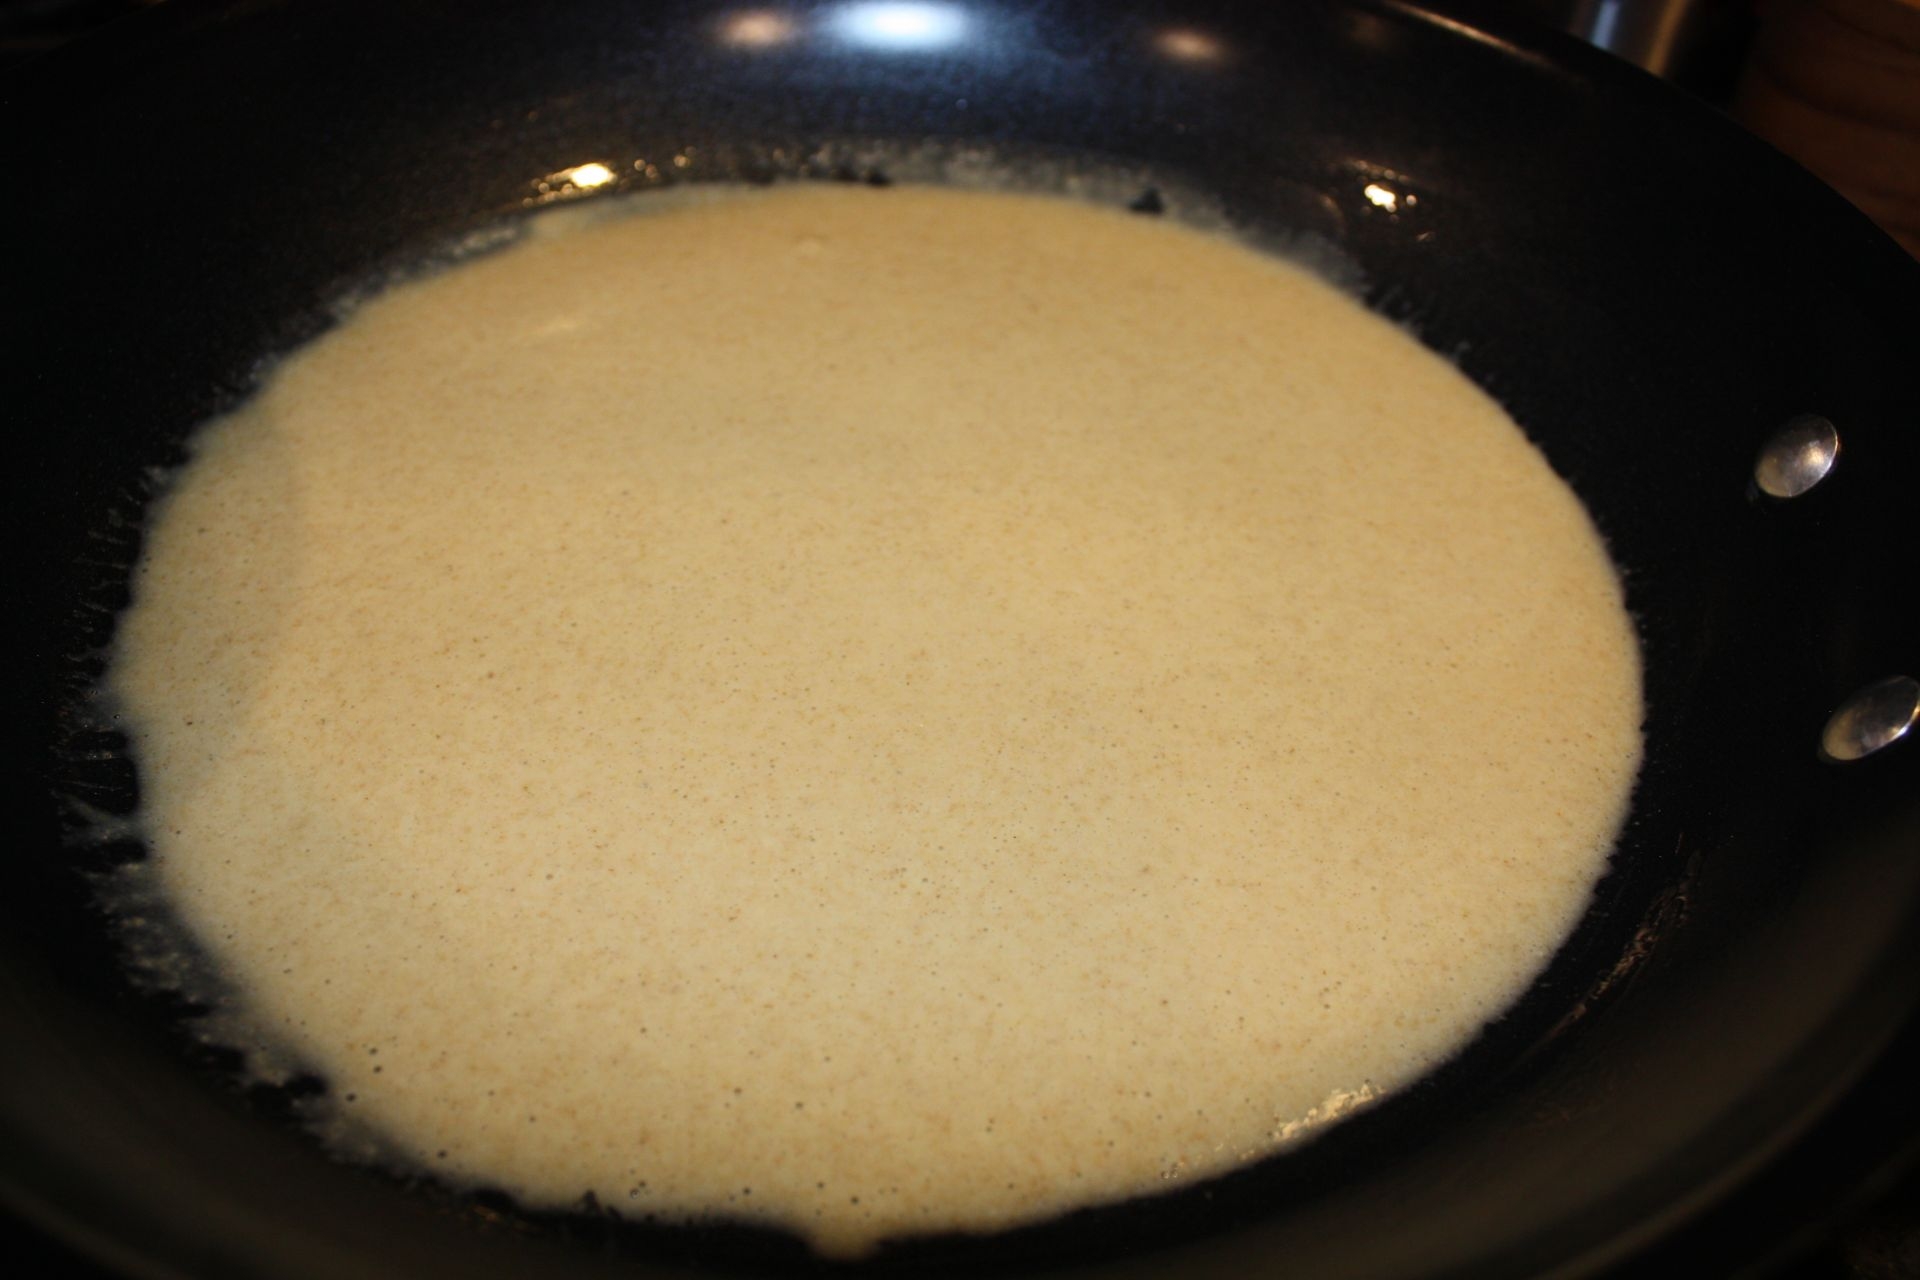 the crepe batter is spread all over the pan